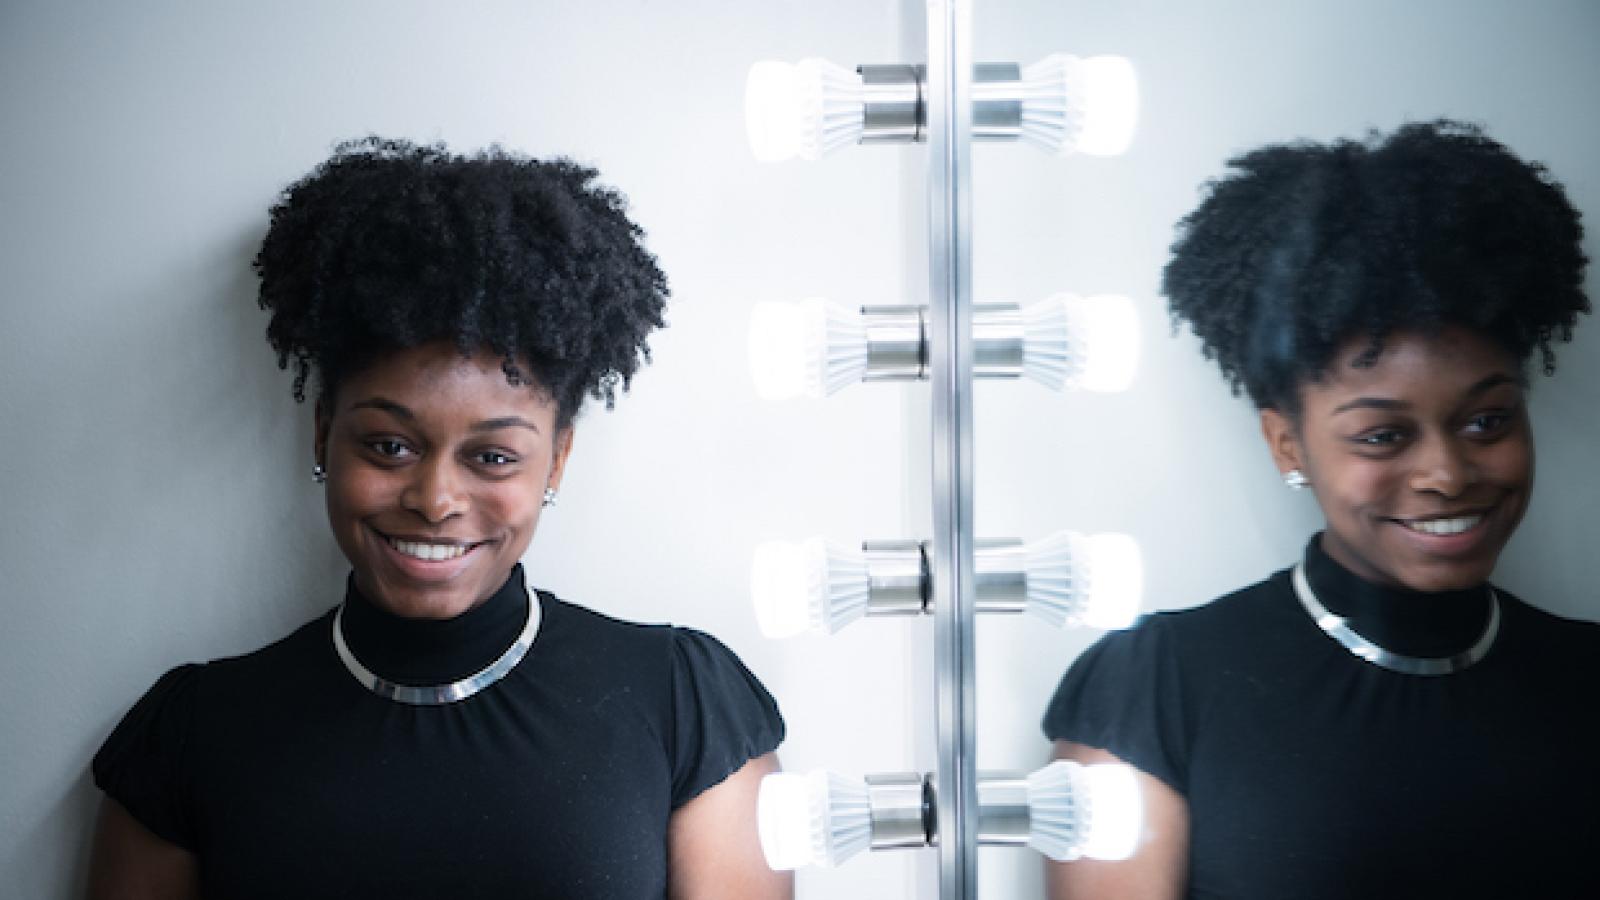 a young African American woman with an updo and a black top stands next to a dressing room mirror so her image is doubled